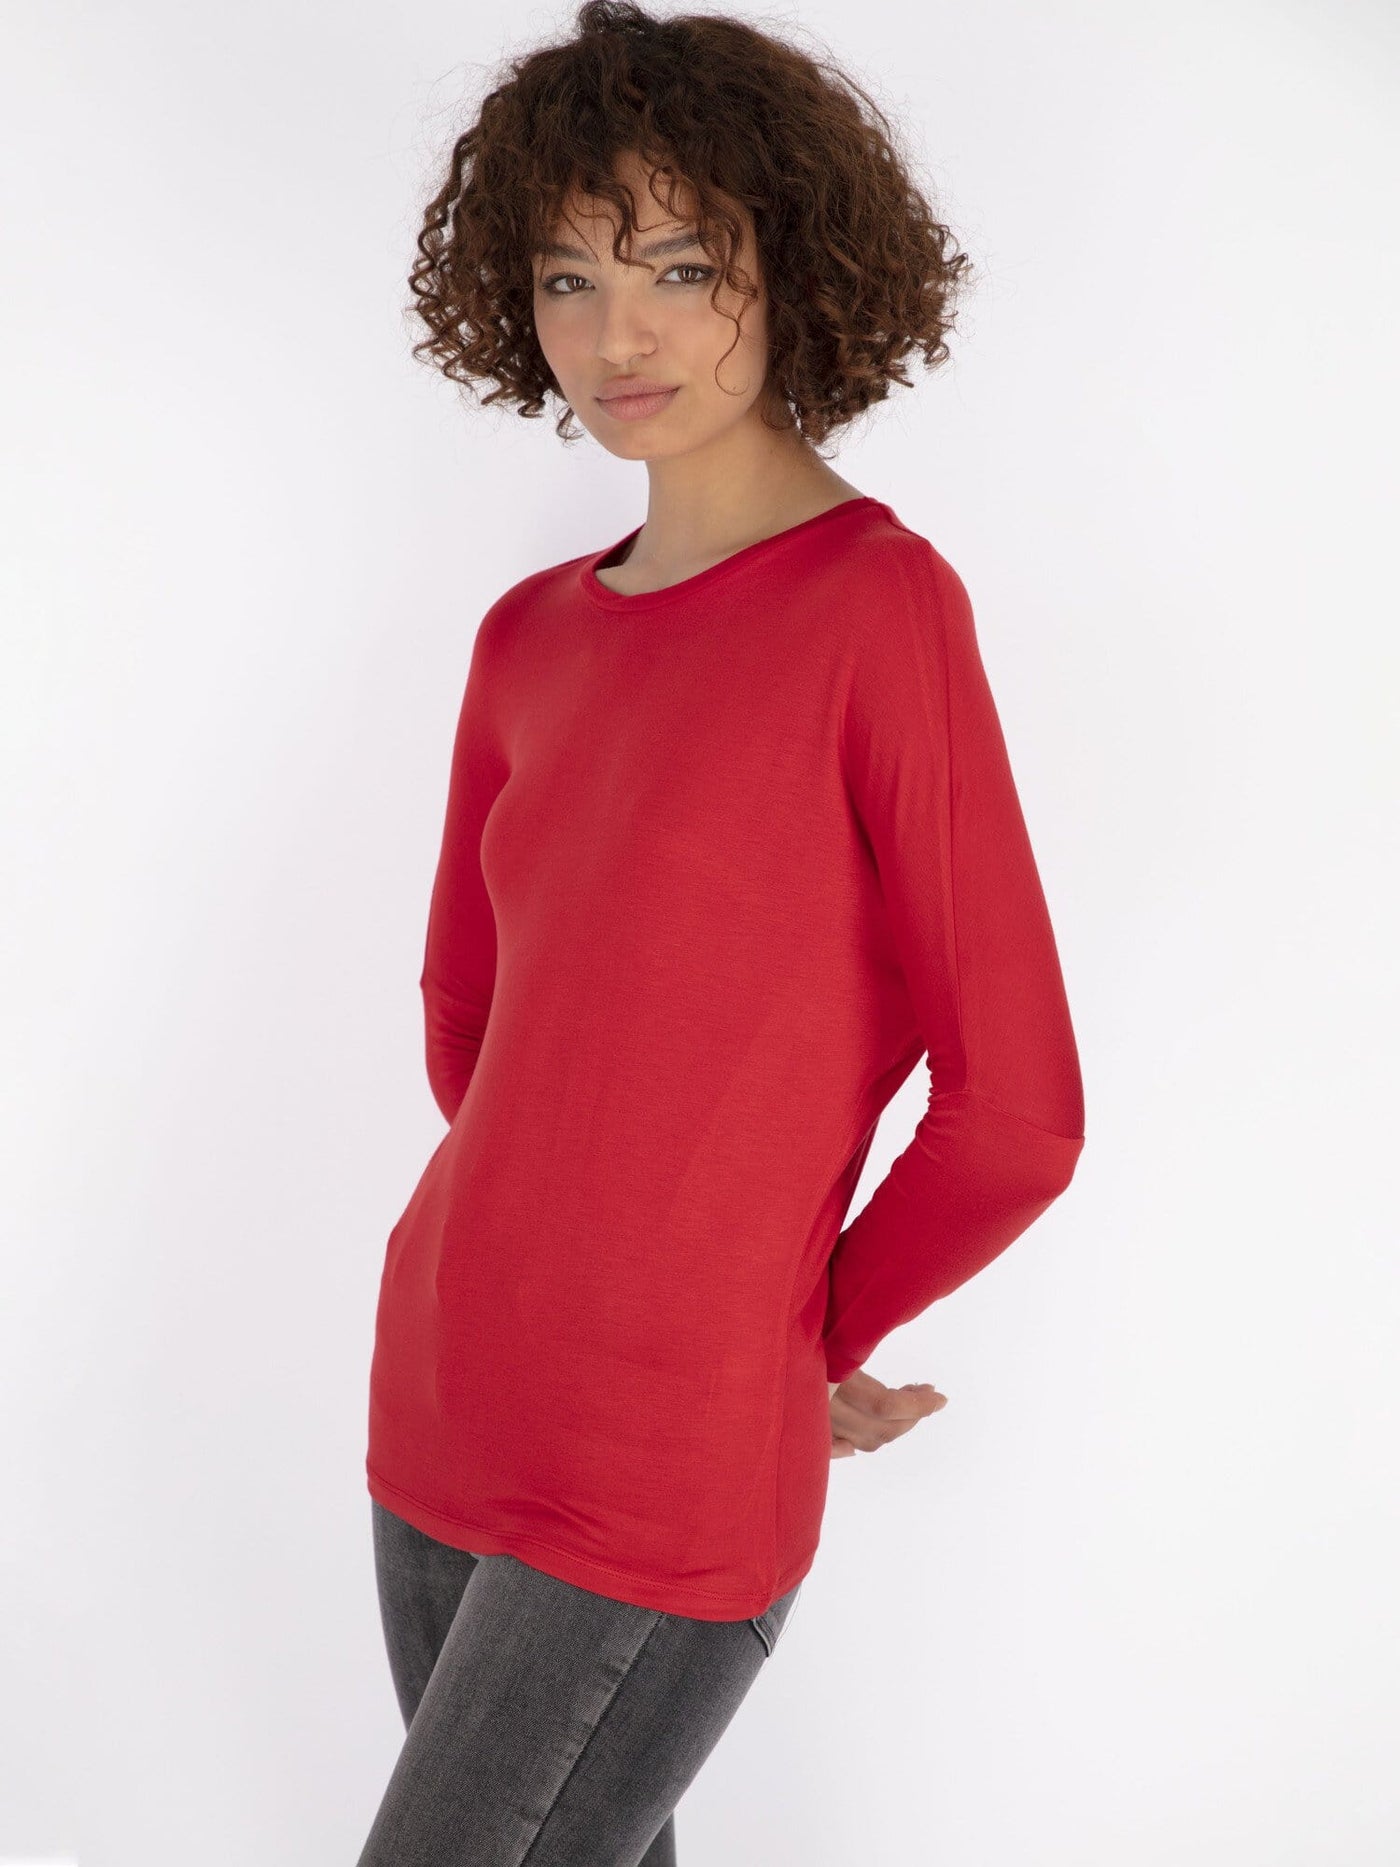 OR Tops & Blouses Basic Long Batwing Sleeve Top